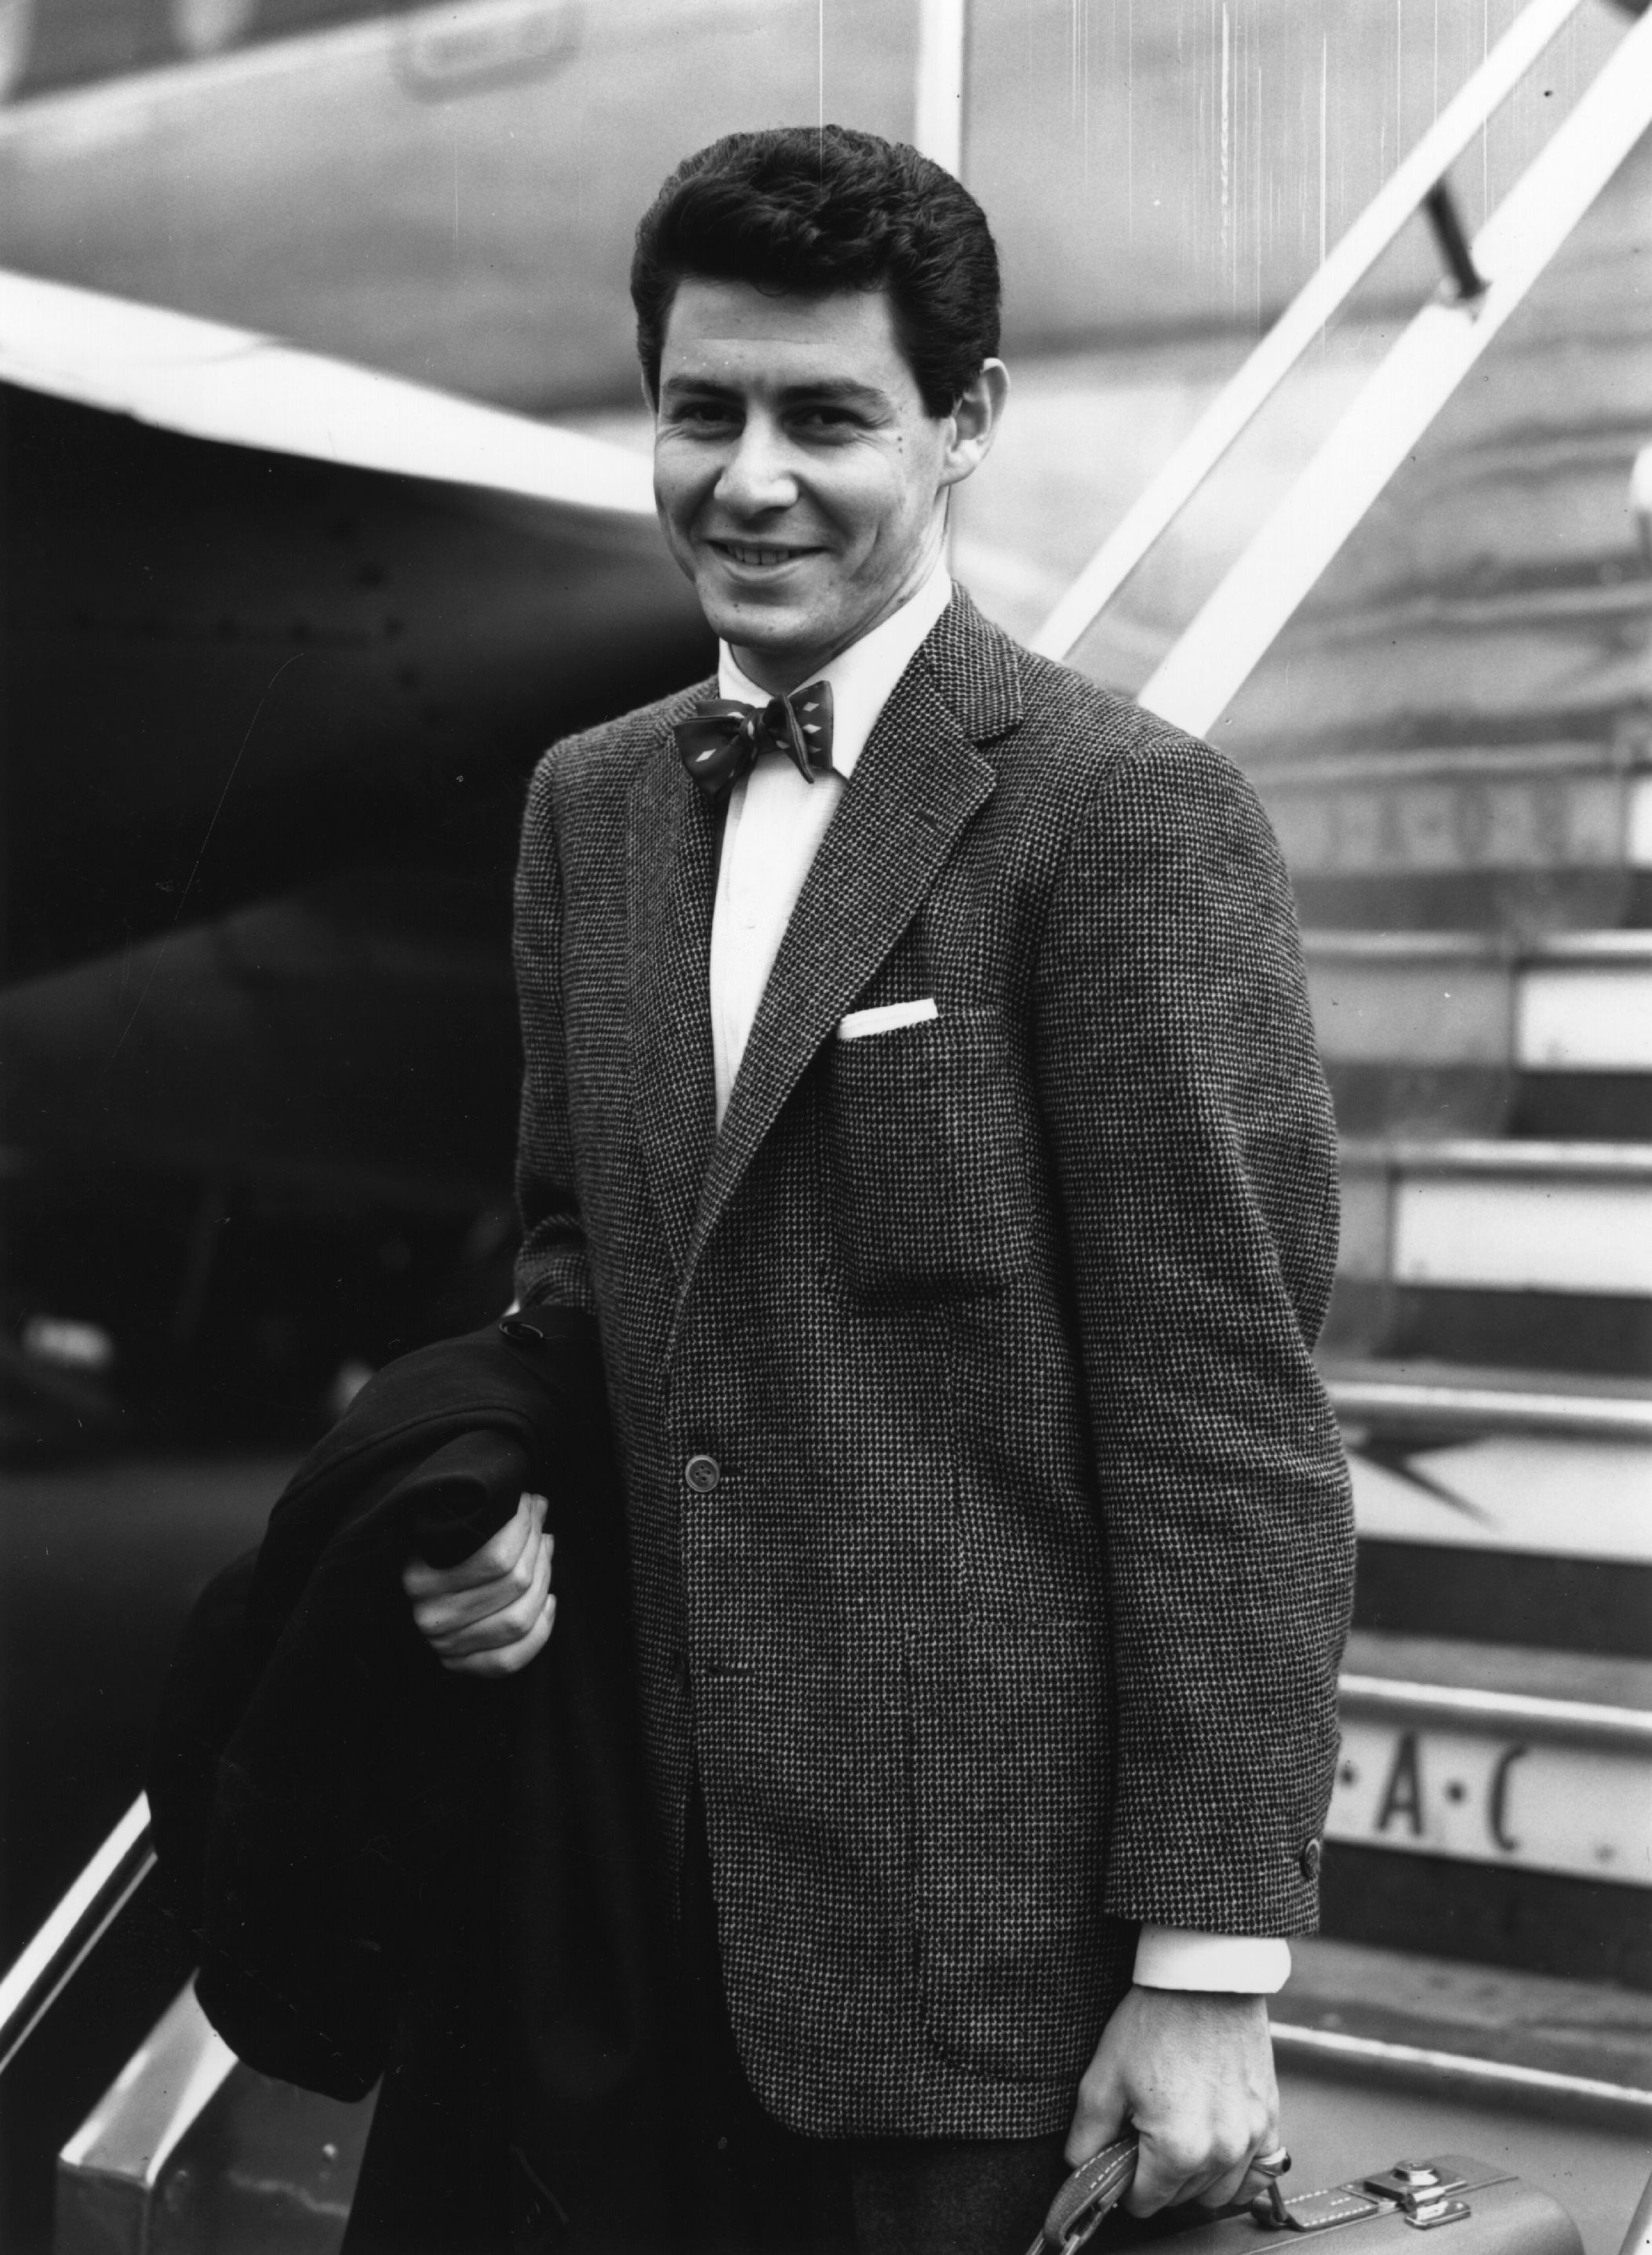 American singer and 'bobby sox idol' Eddie Fisher at London Airport. | Getty Images